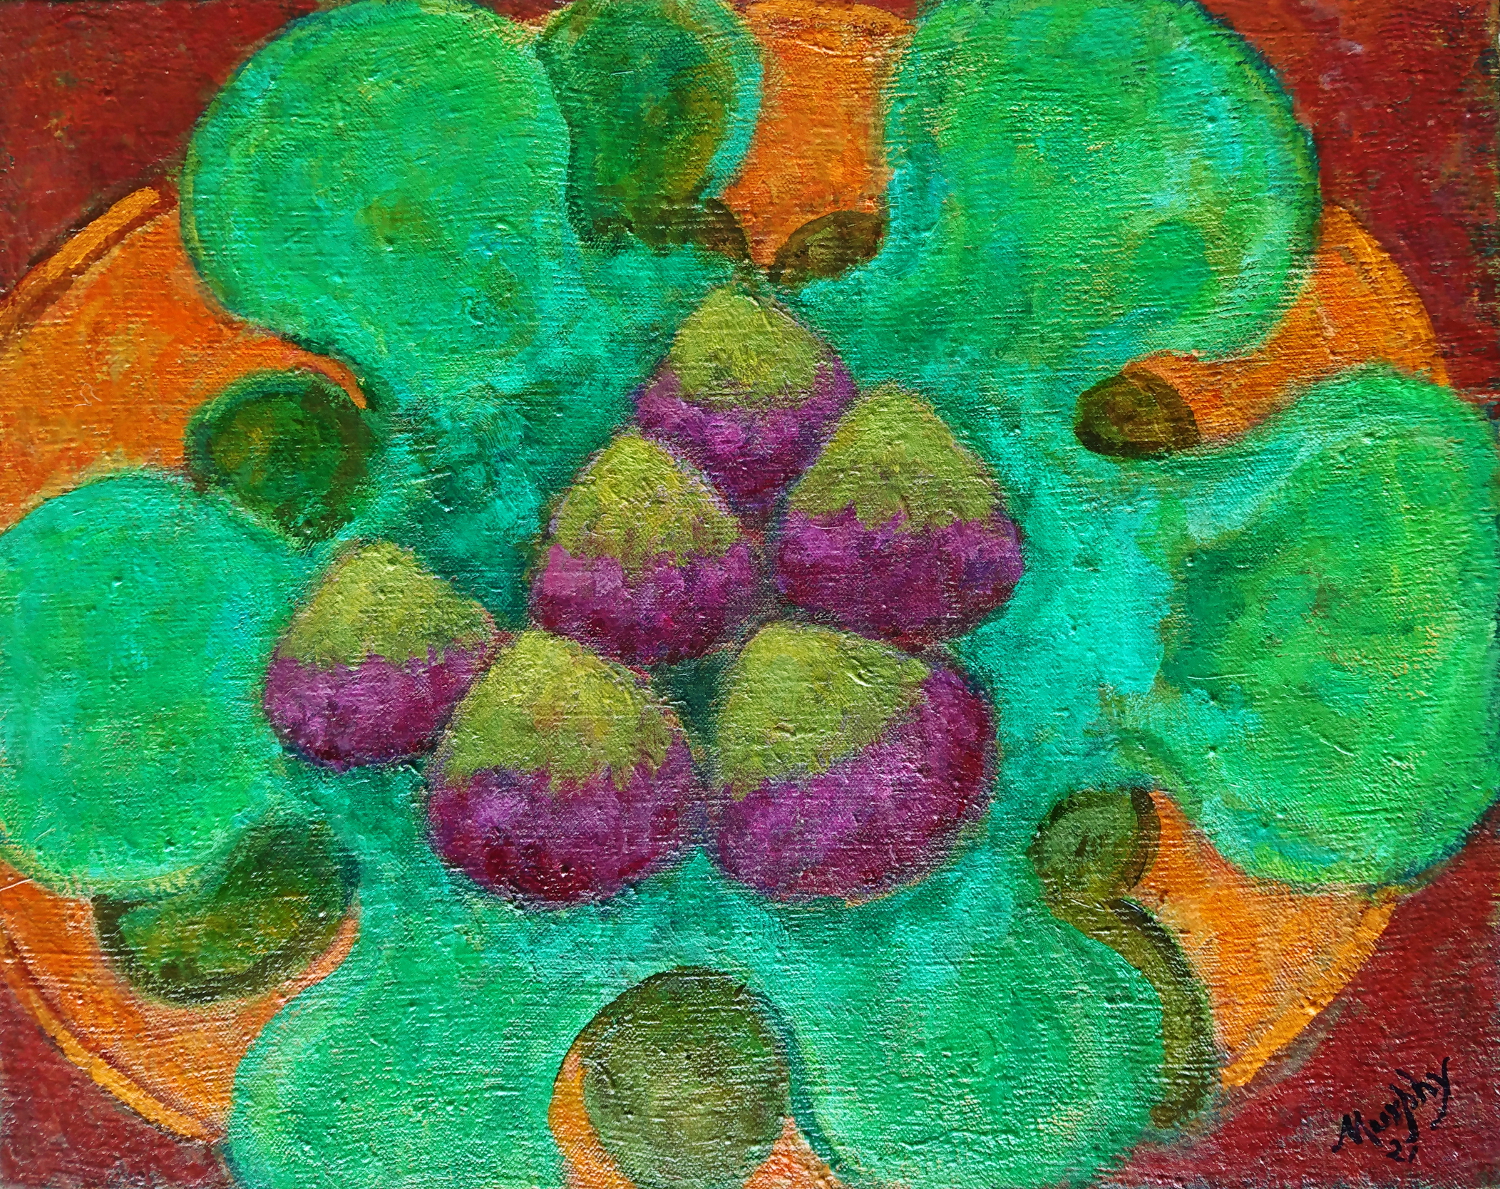 Still-Life-with-Figs-61-x-50-cm-oil-on-canvas-web